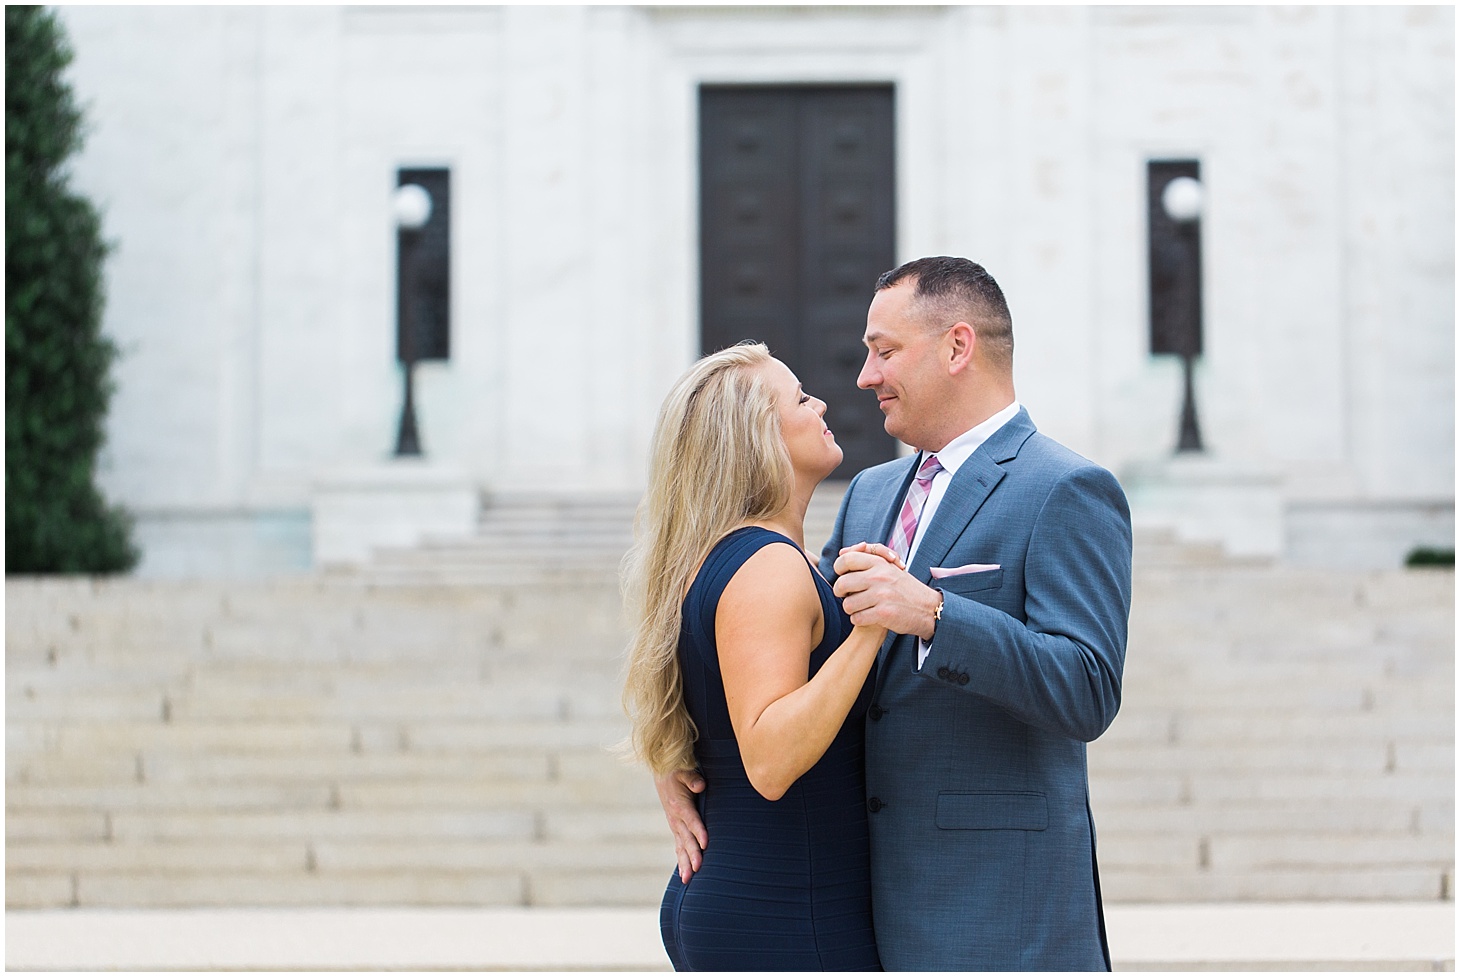 romantic-engagement-shoot-around-the-beautiful-d-c-monuments-by-sarah-bradshaw-photography_0008